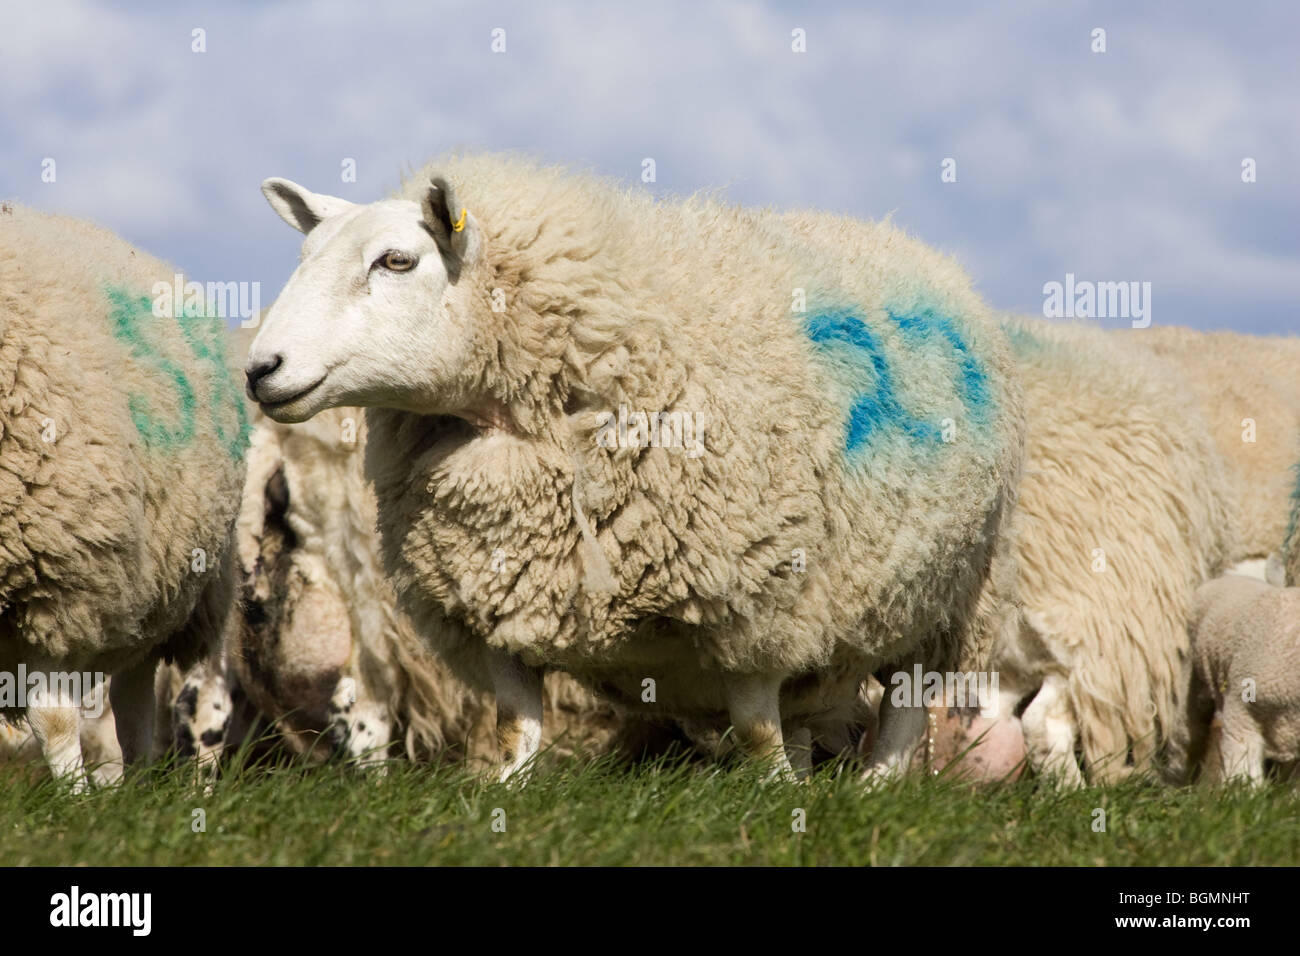 Ewe out at Grass Stock Photo